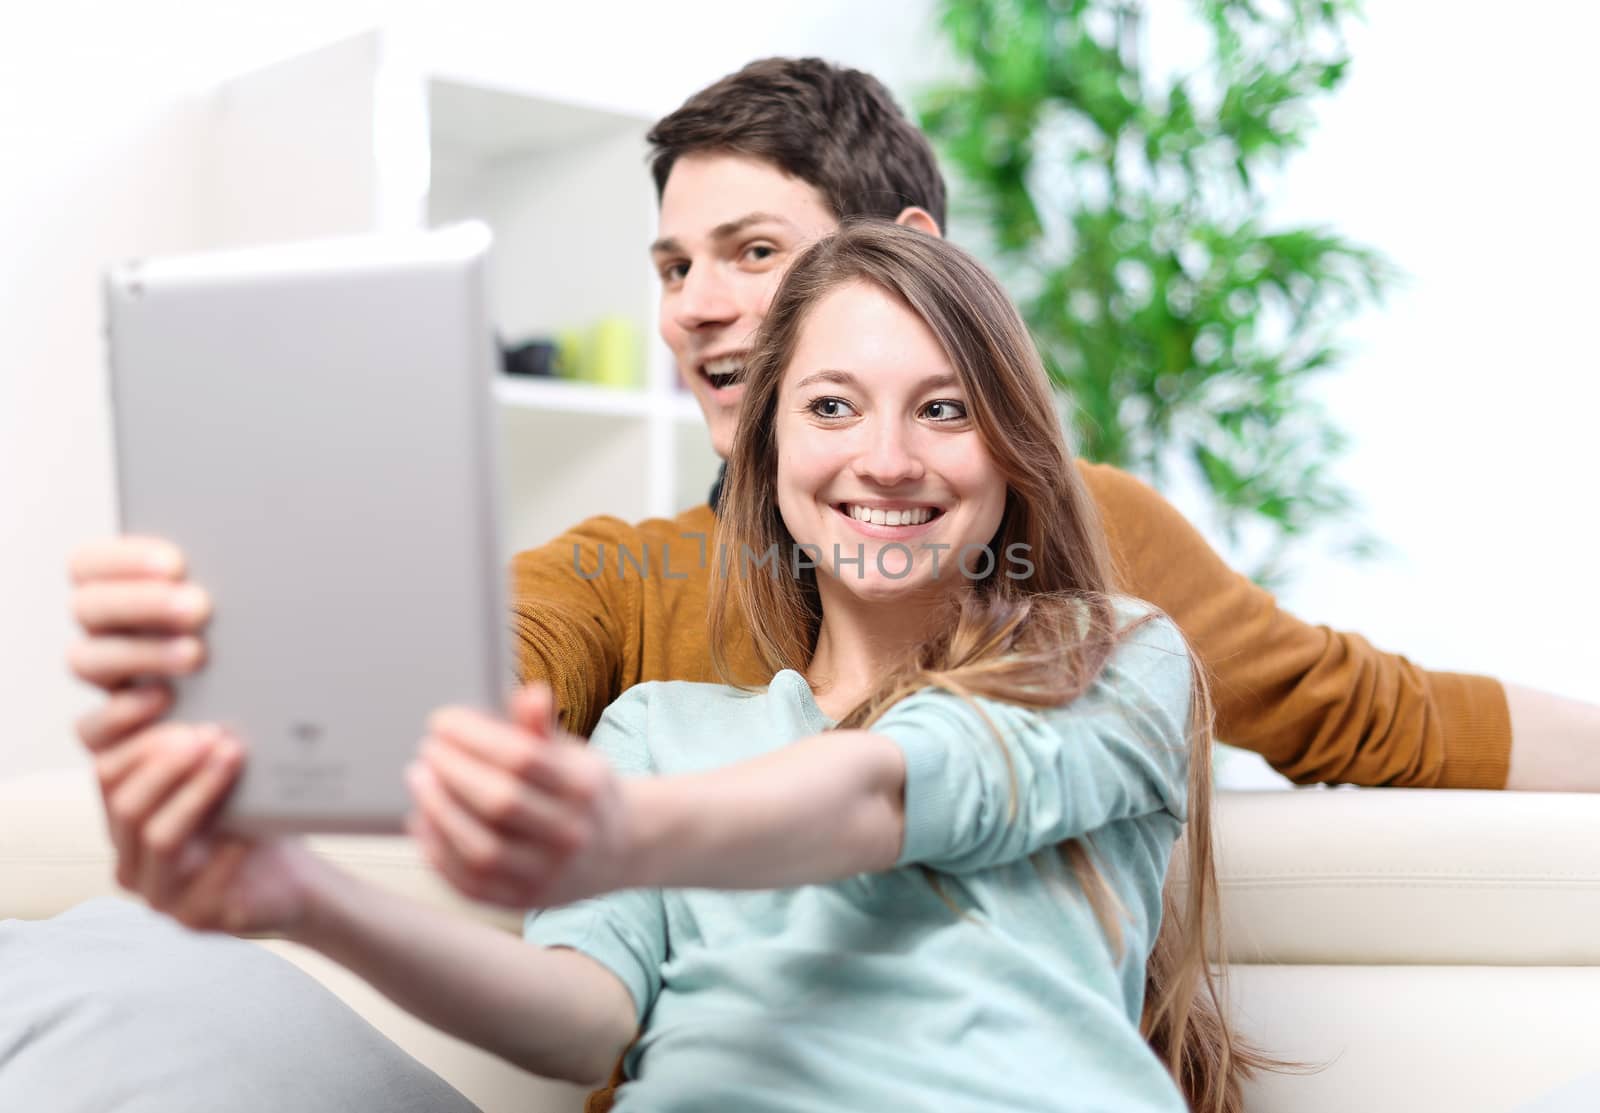 Two happy friends taking photo with tablet pc at home on the couch